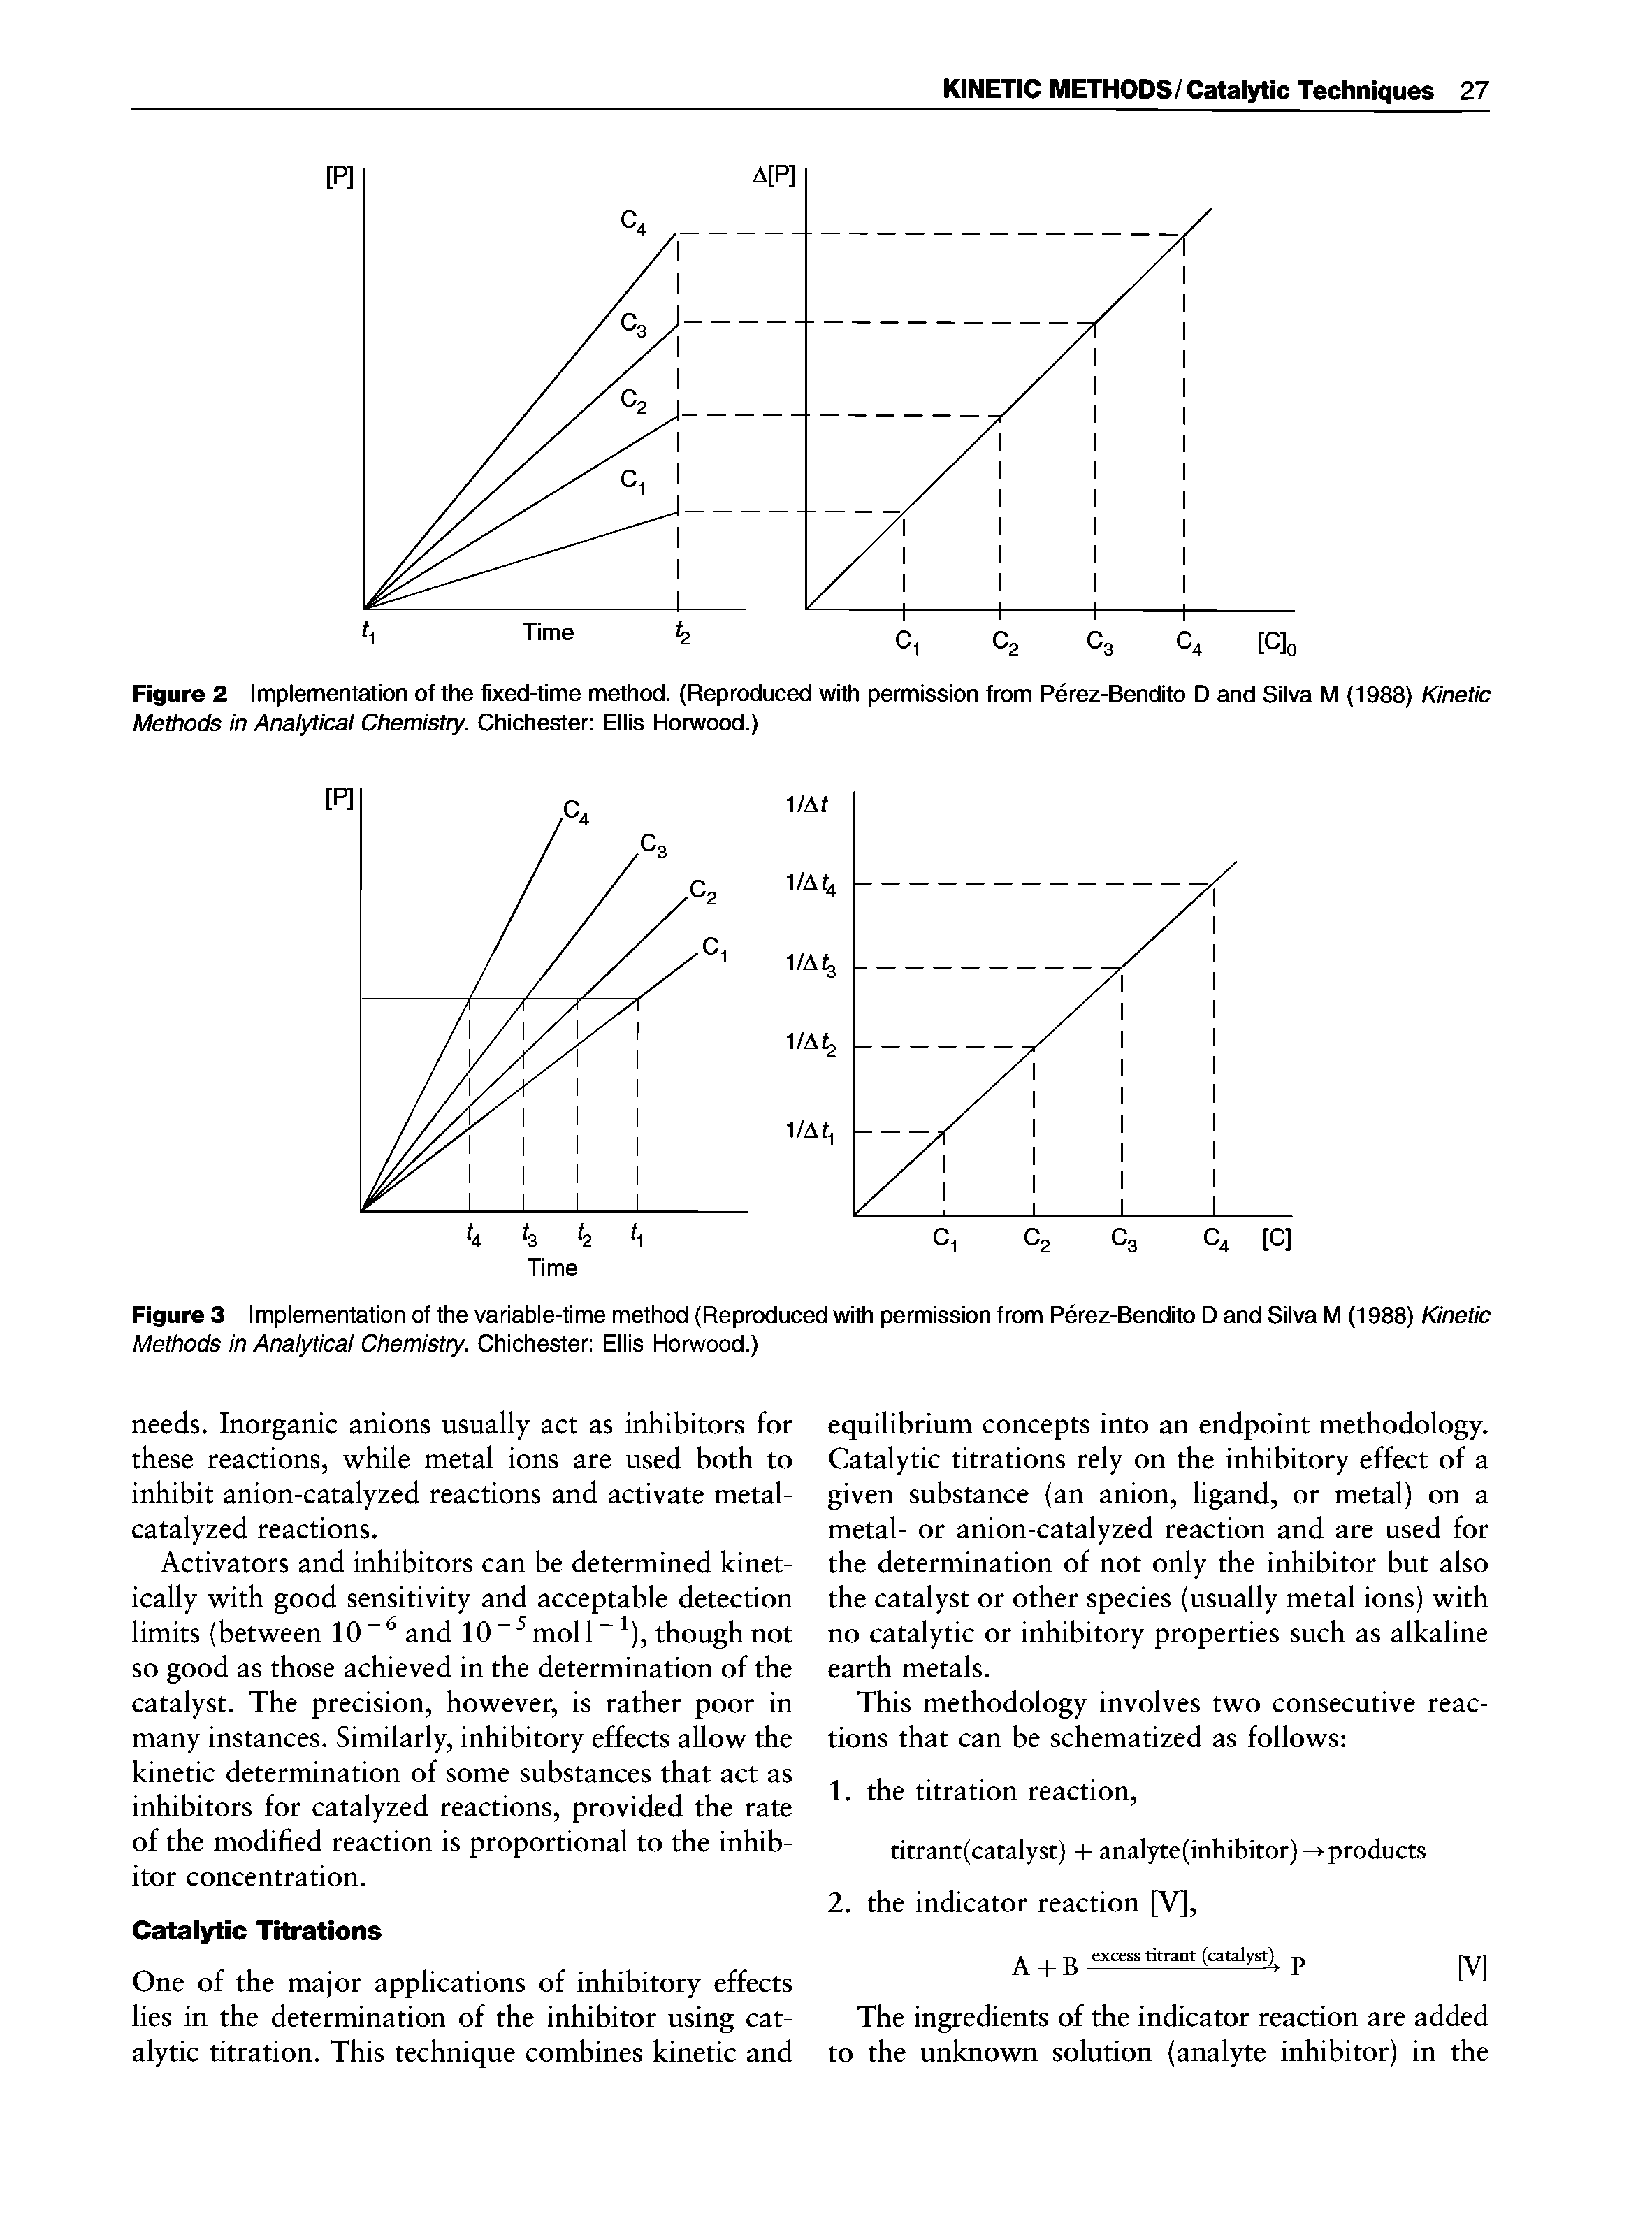 Figure 3 Implementation of the variable-time method (Reproduced with permission from Perez-Bendito D and Silva M (1988) Kinetic Methods in Analytical Chemistry. Chichester Ellis Norwood.)...